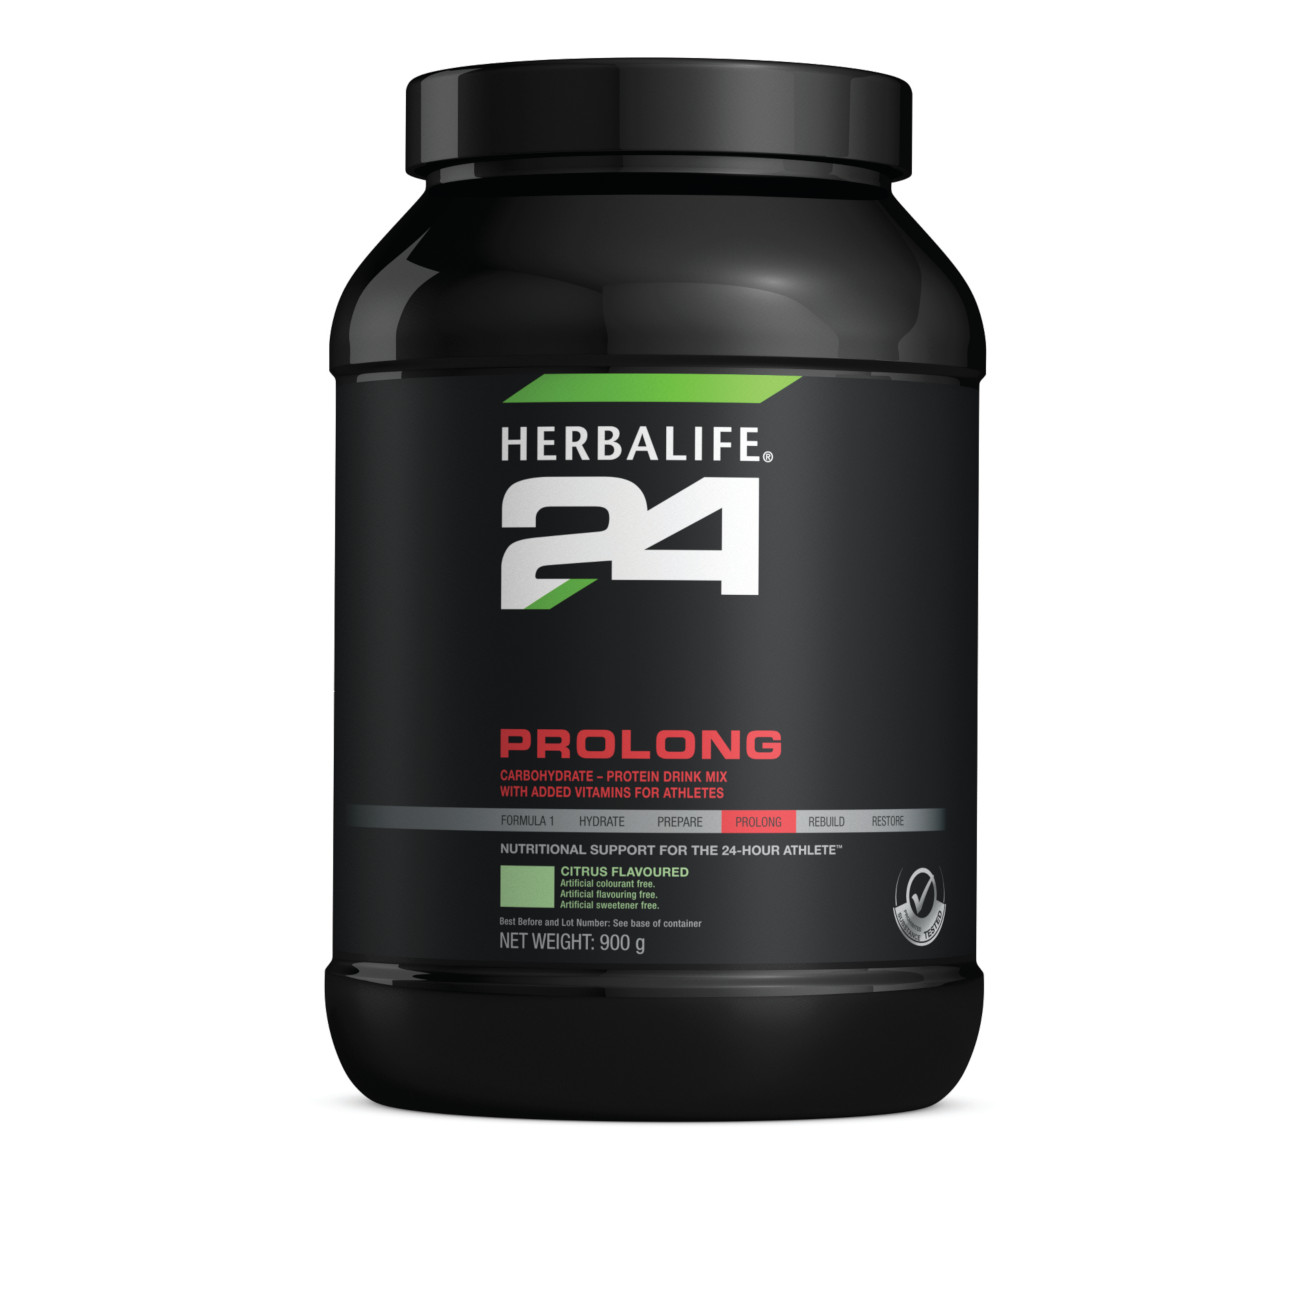 Herbalife24® Prolong Carbohydrate-Protein Drink Mix Citrus Flavoured product shot